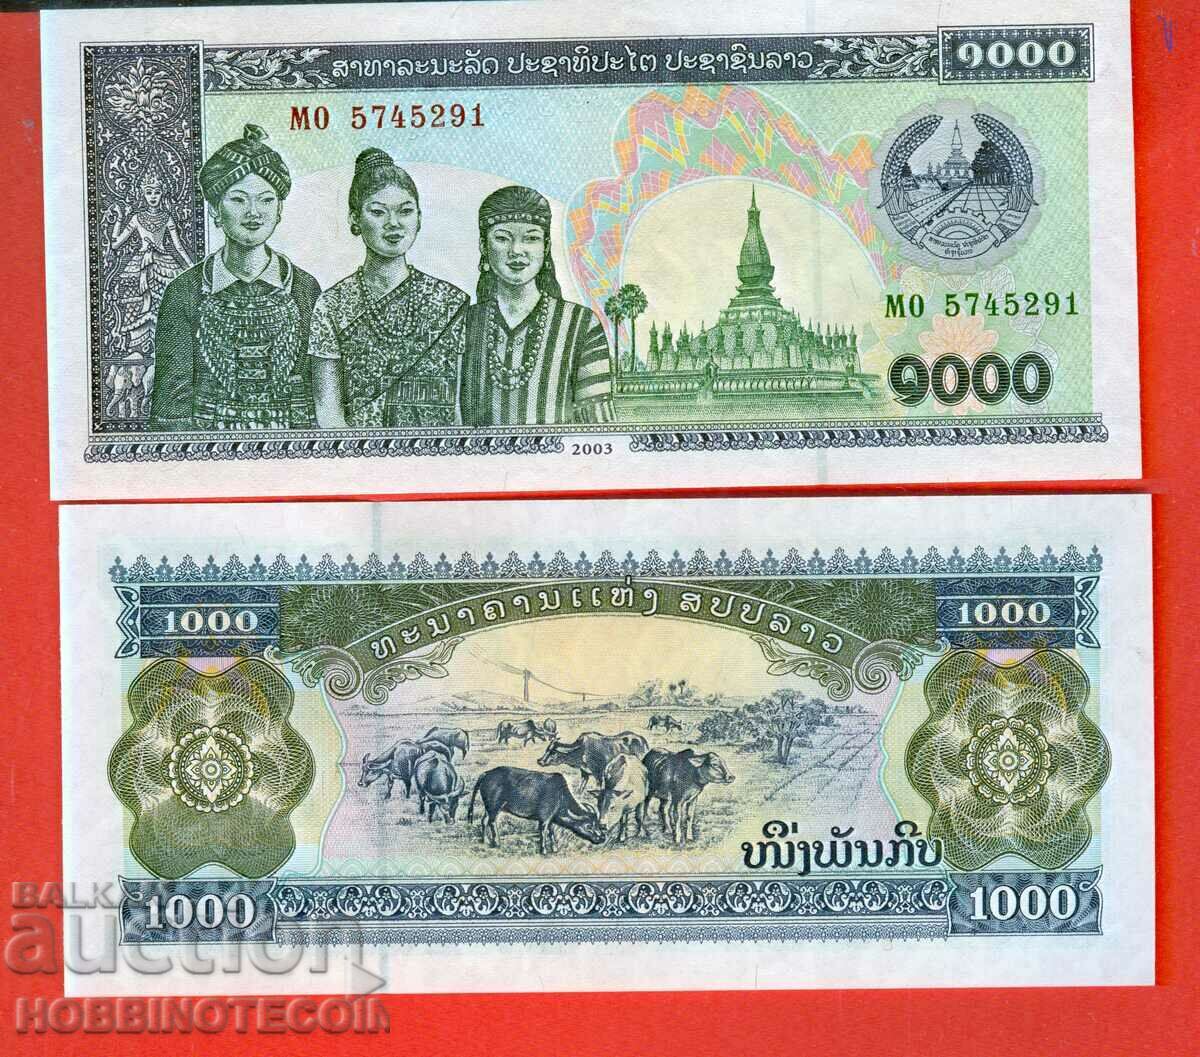 LAOS LAO 1000 1 000 Kip issue issue 2003 NEW UNC